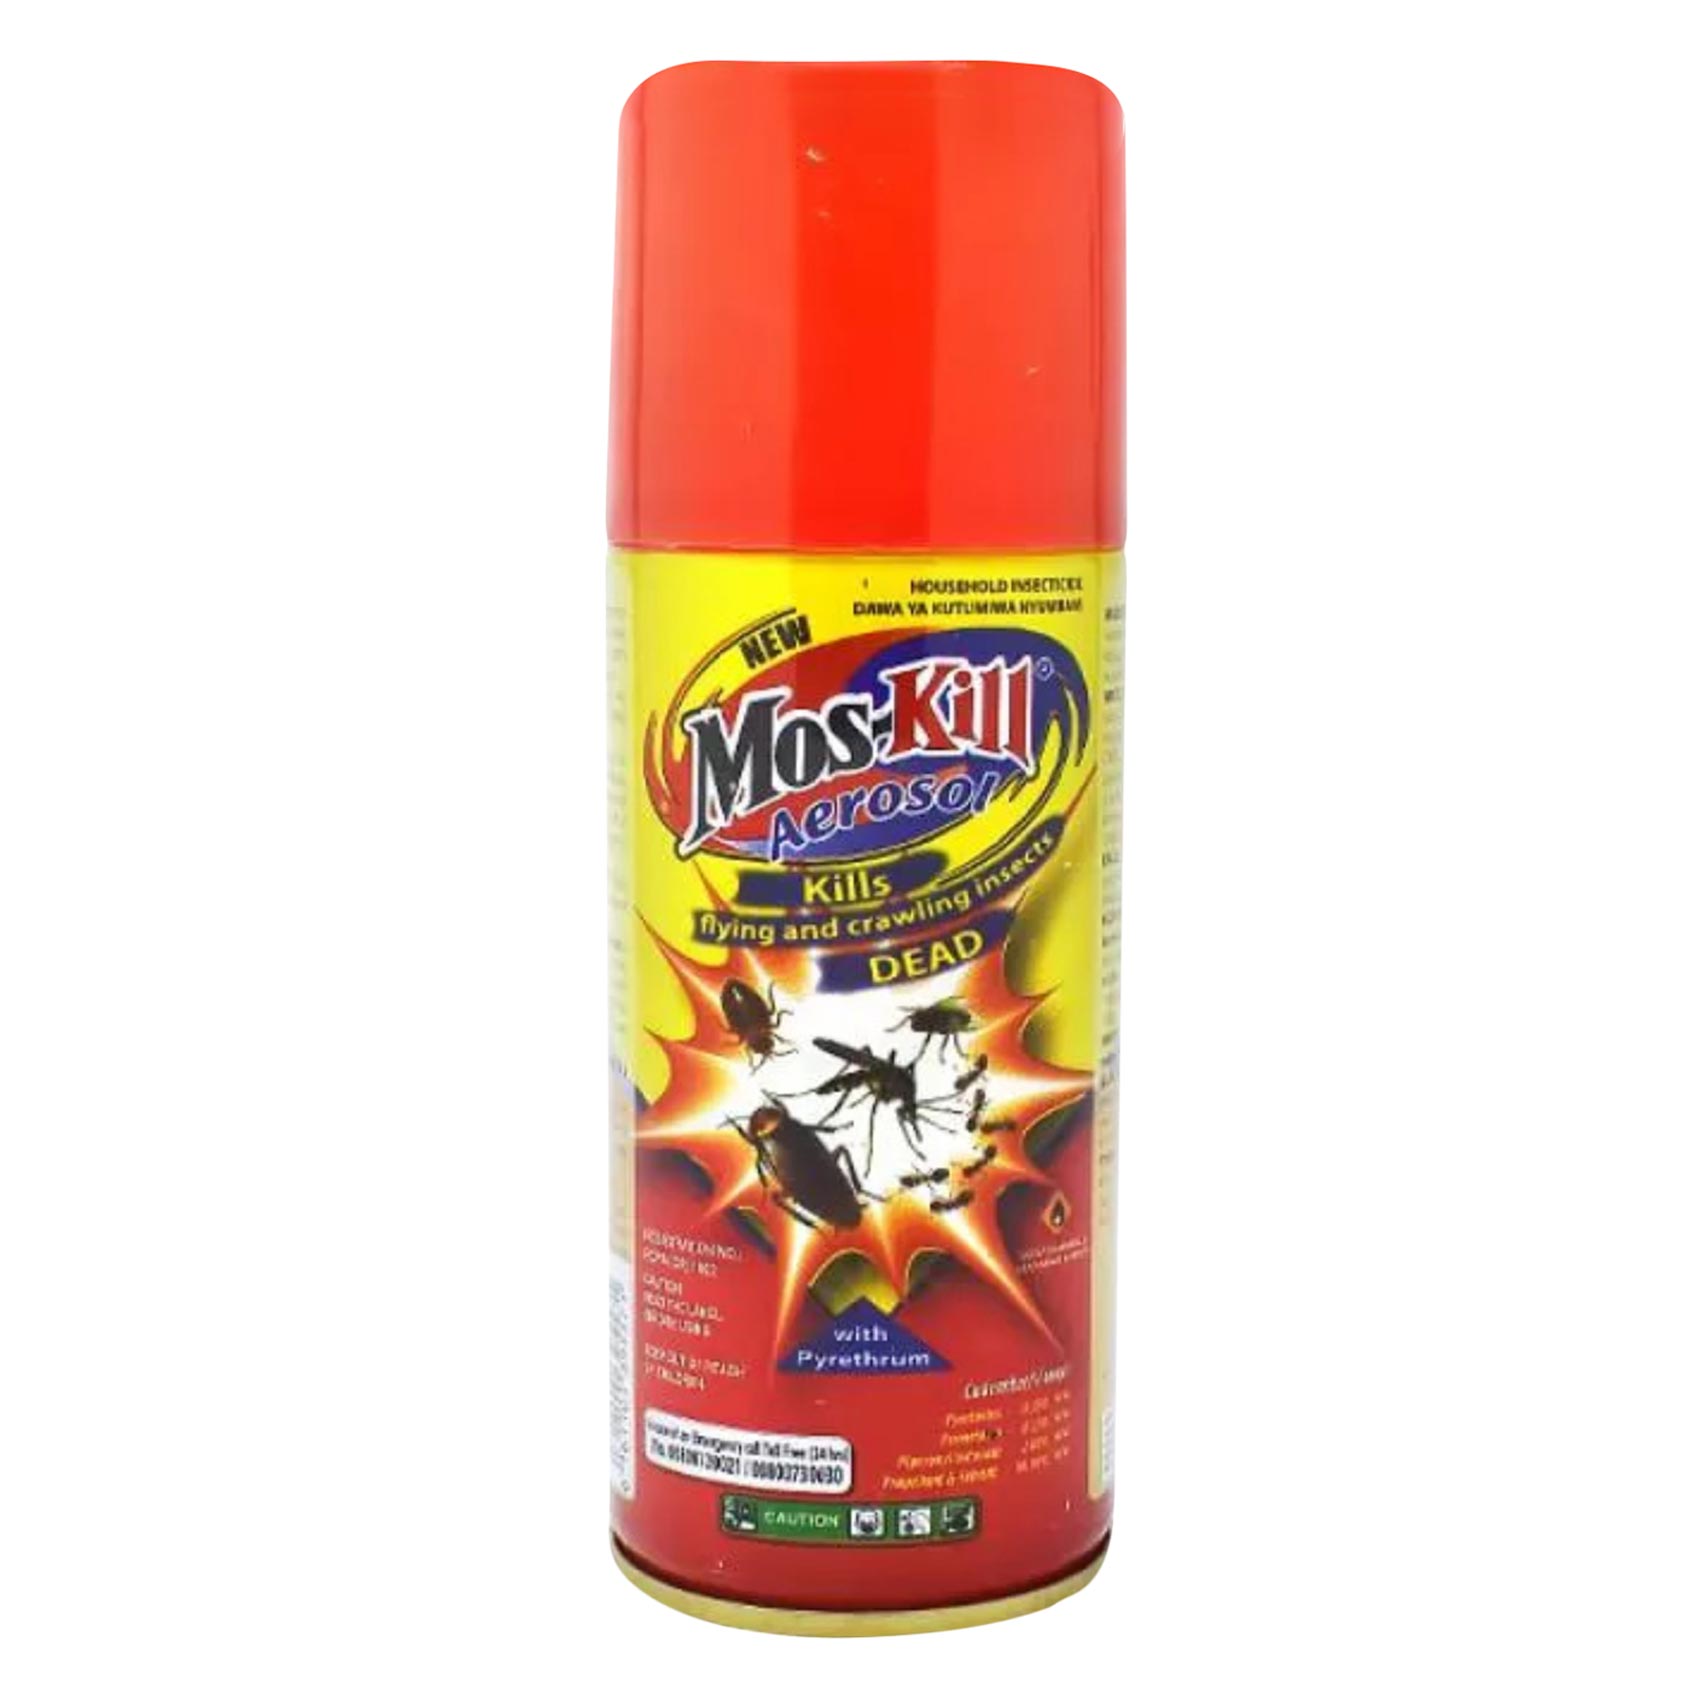 Moskill Aerosol Insecticide Insecticide Spray 600ml